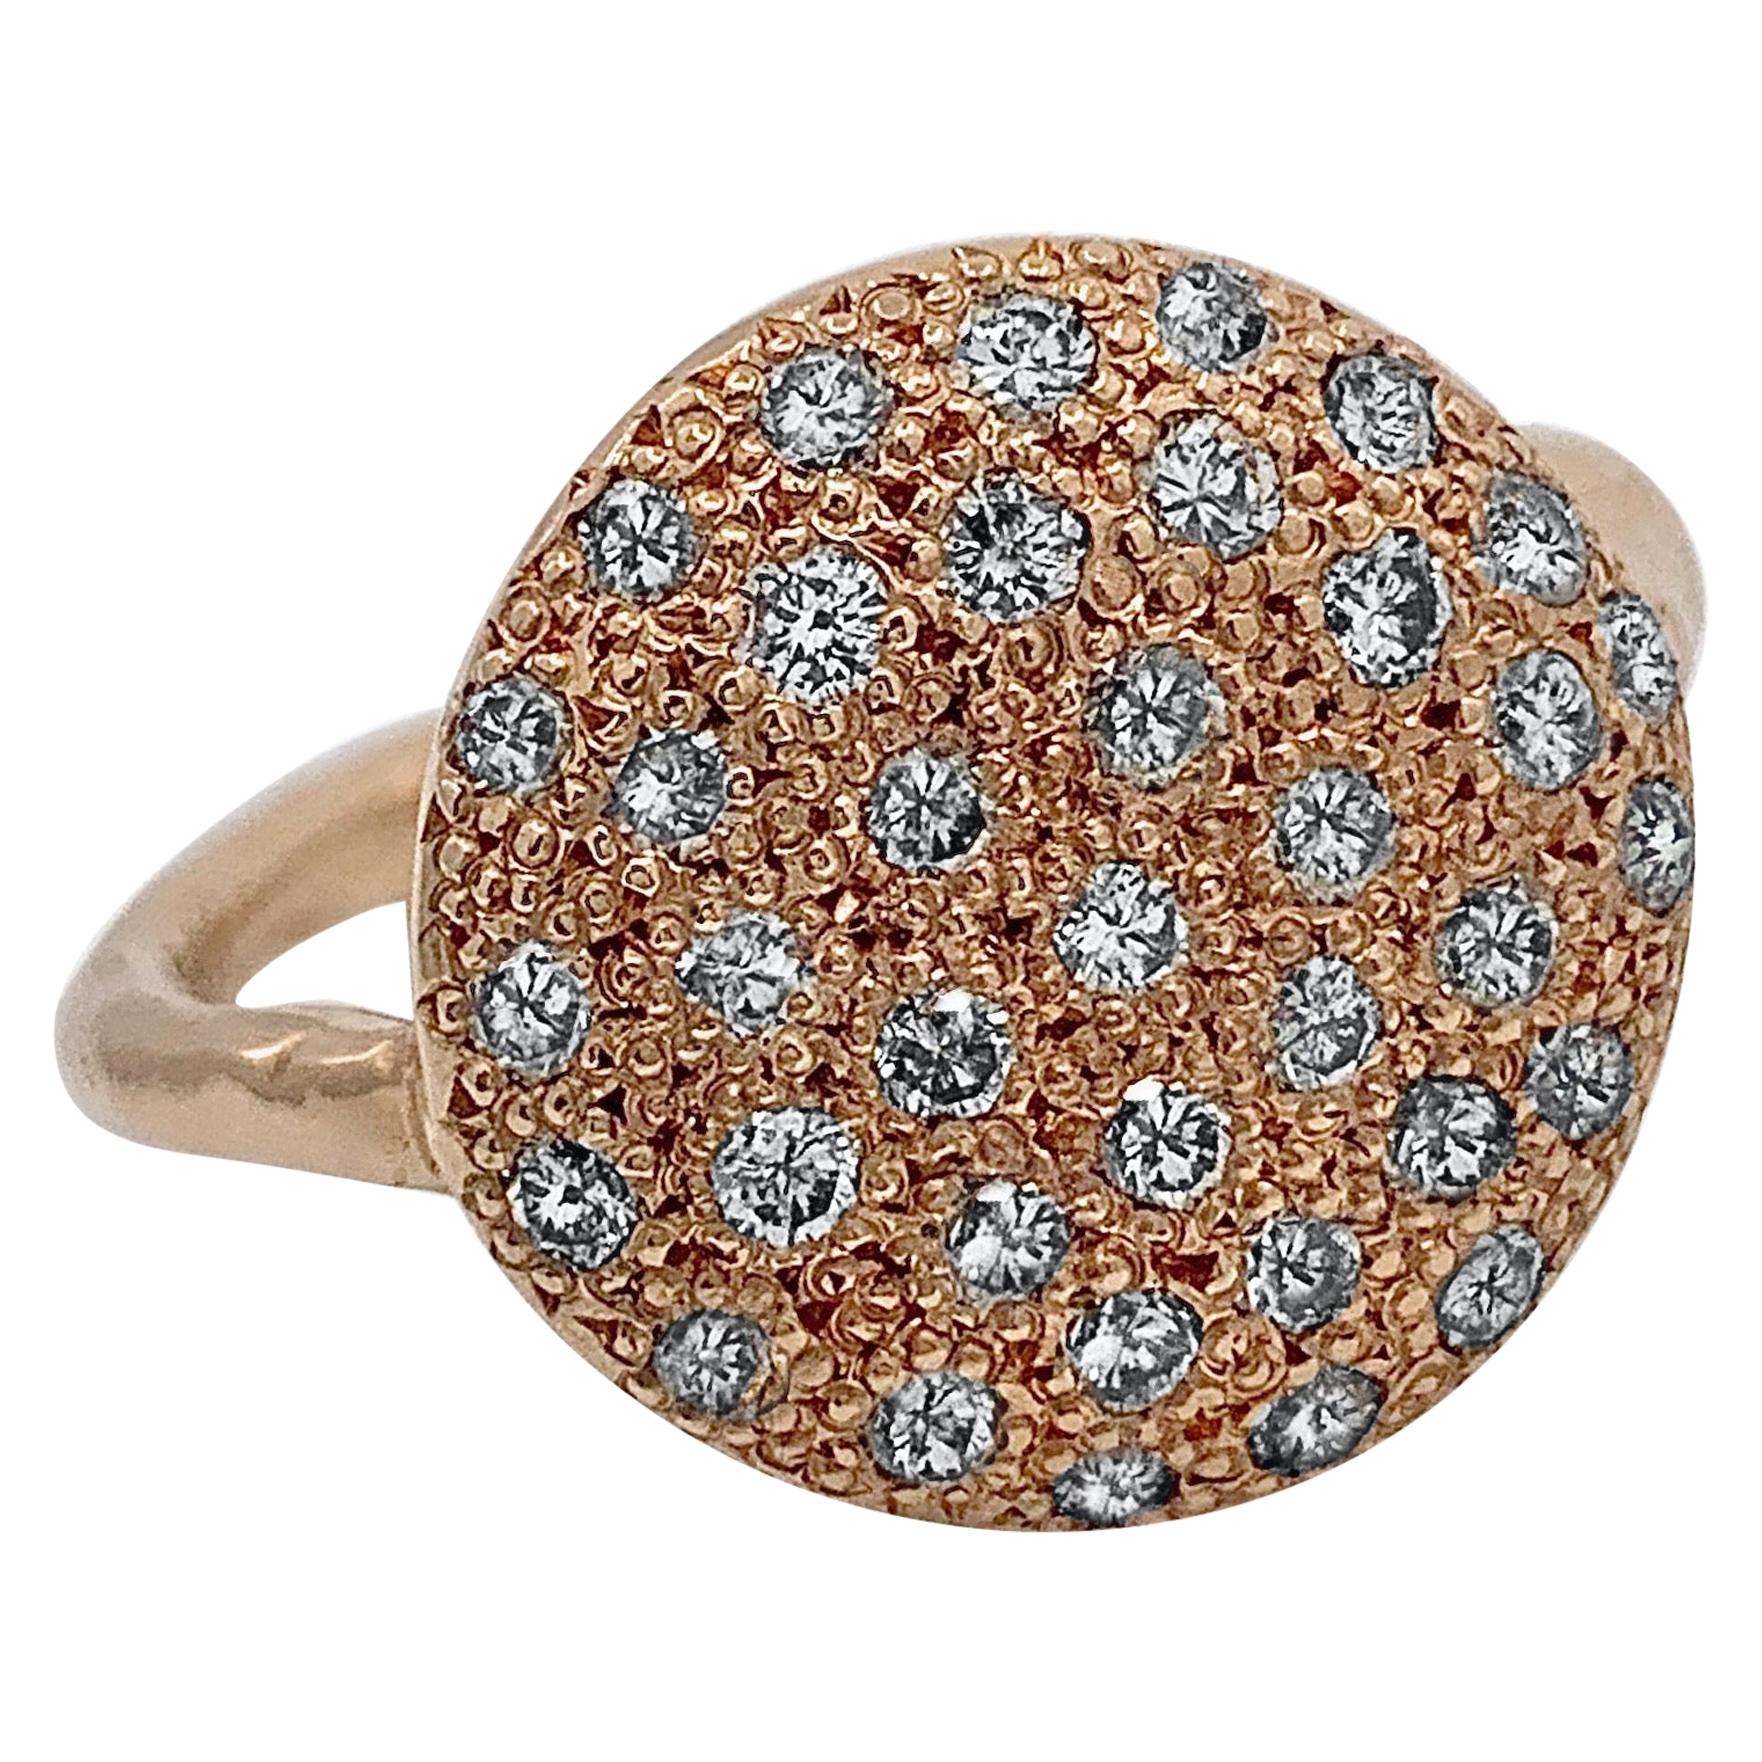 "Big Cookie" 0.36 Carat Pavé Diamond Slab Ring in Textured Rose Gold For Sale